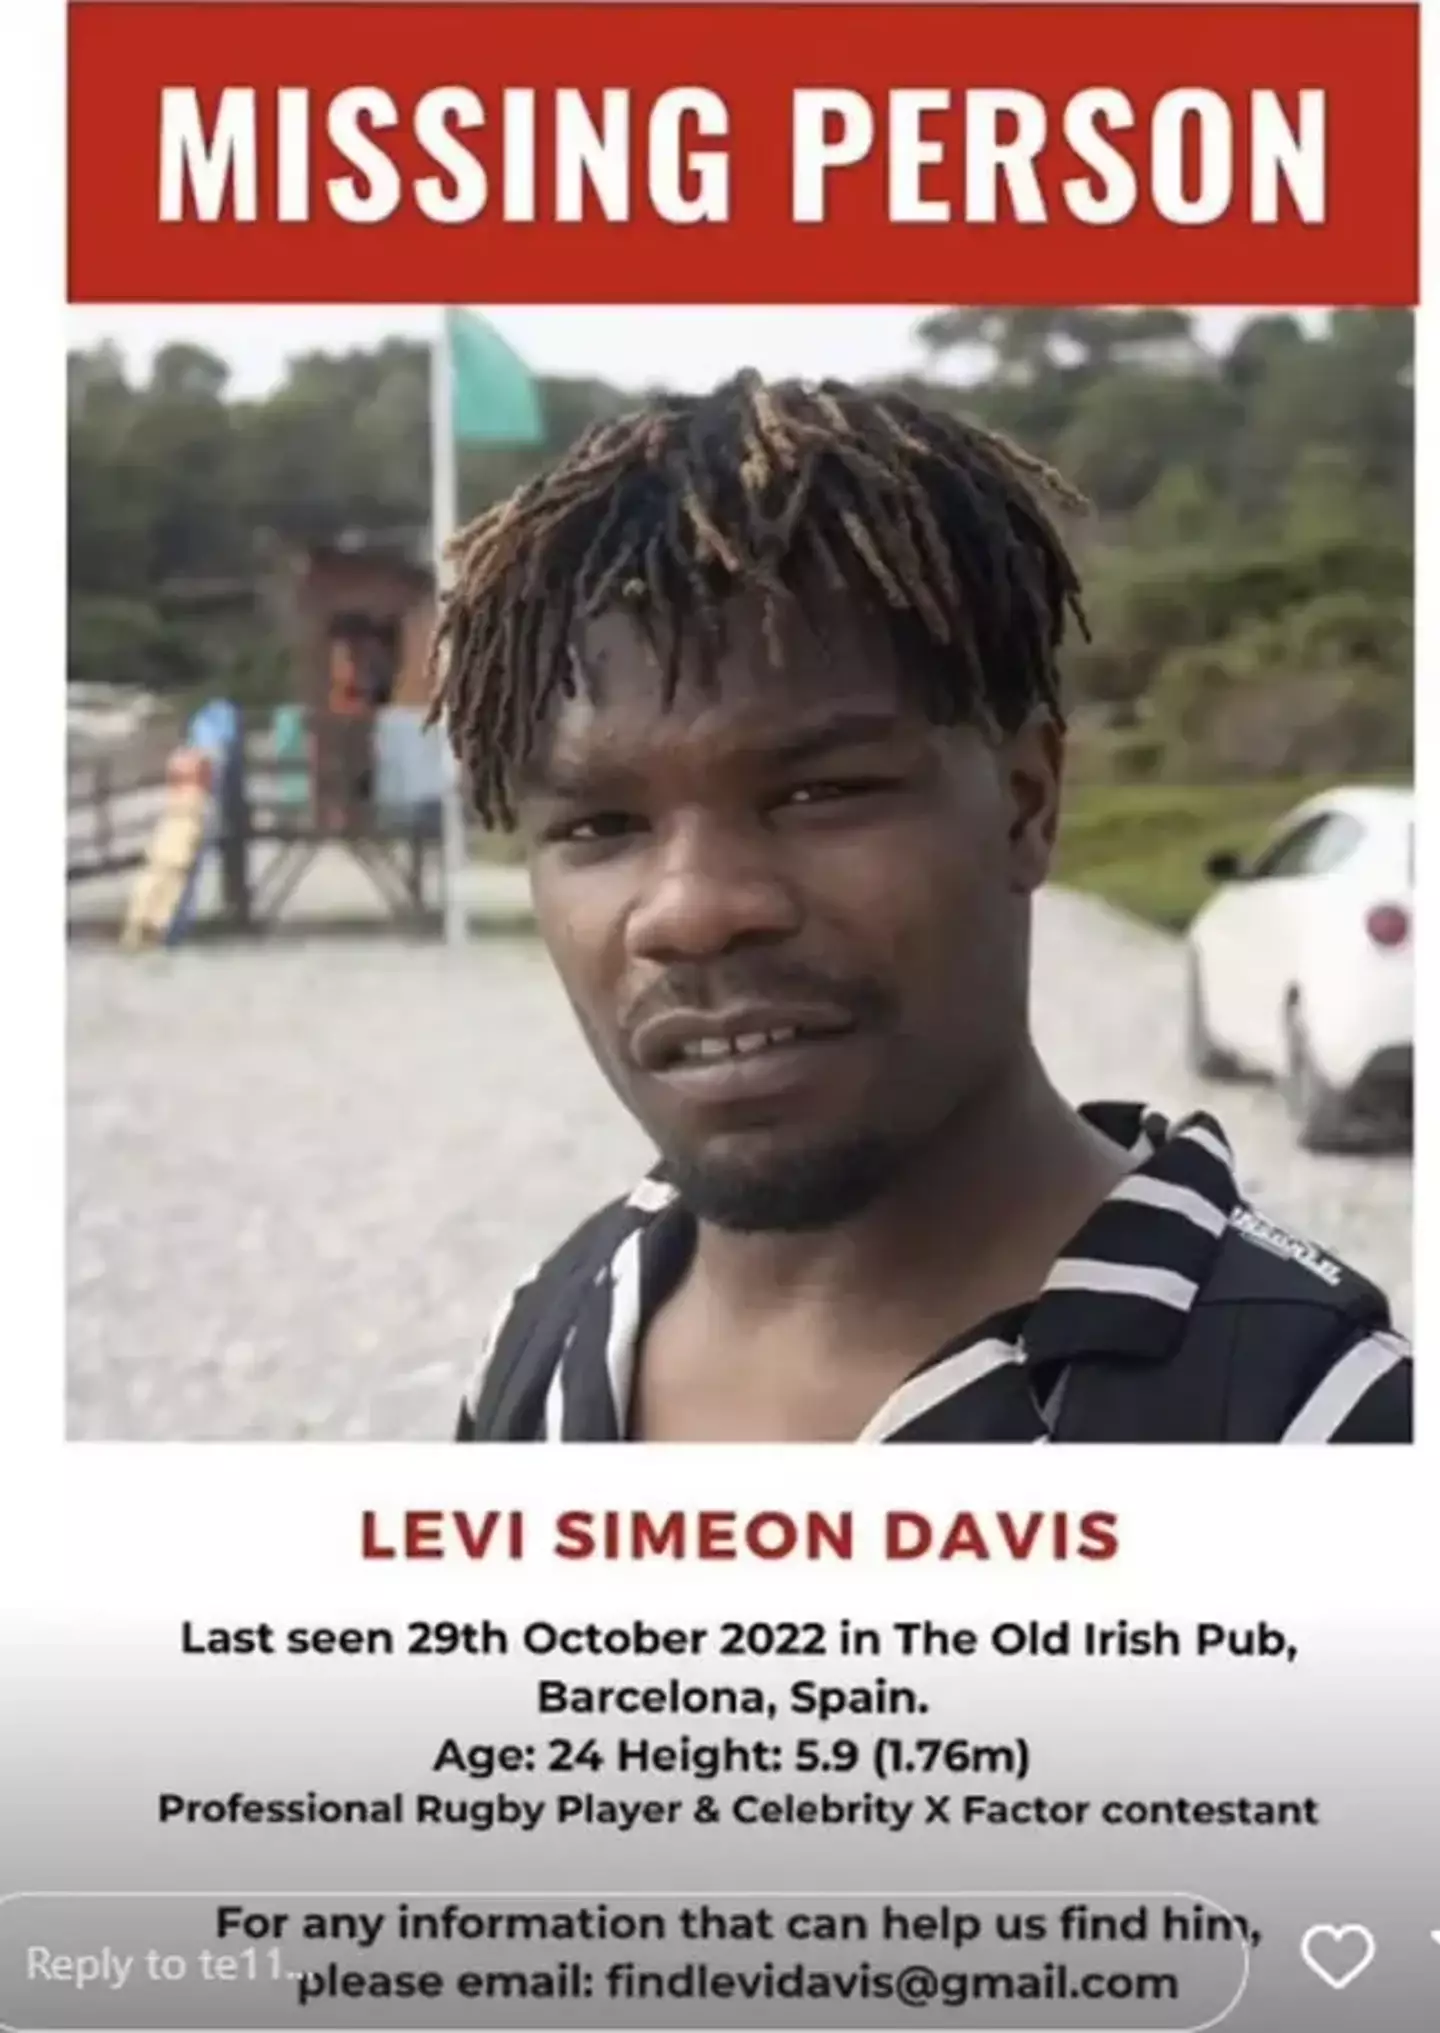 Missing posters have been put up asking for information on the whereabouts of Levi Davis.